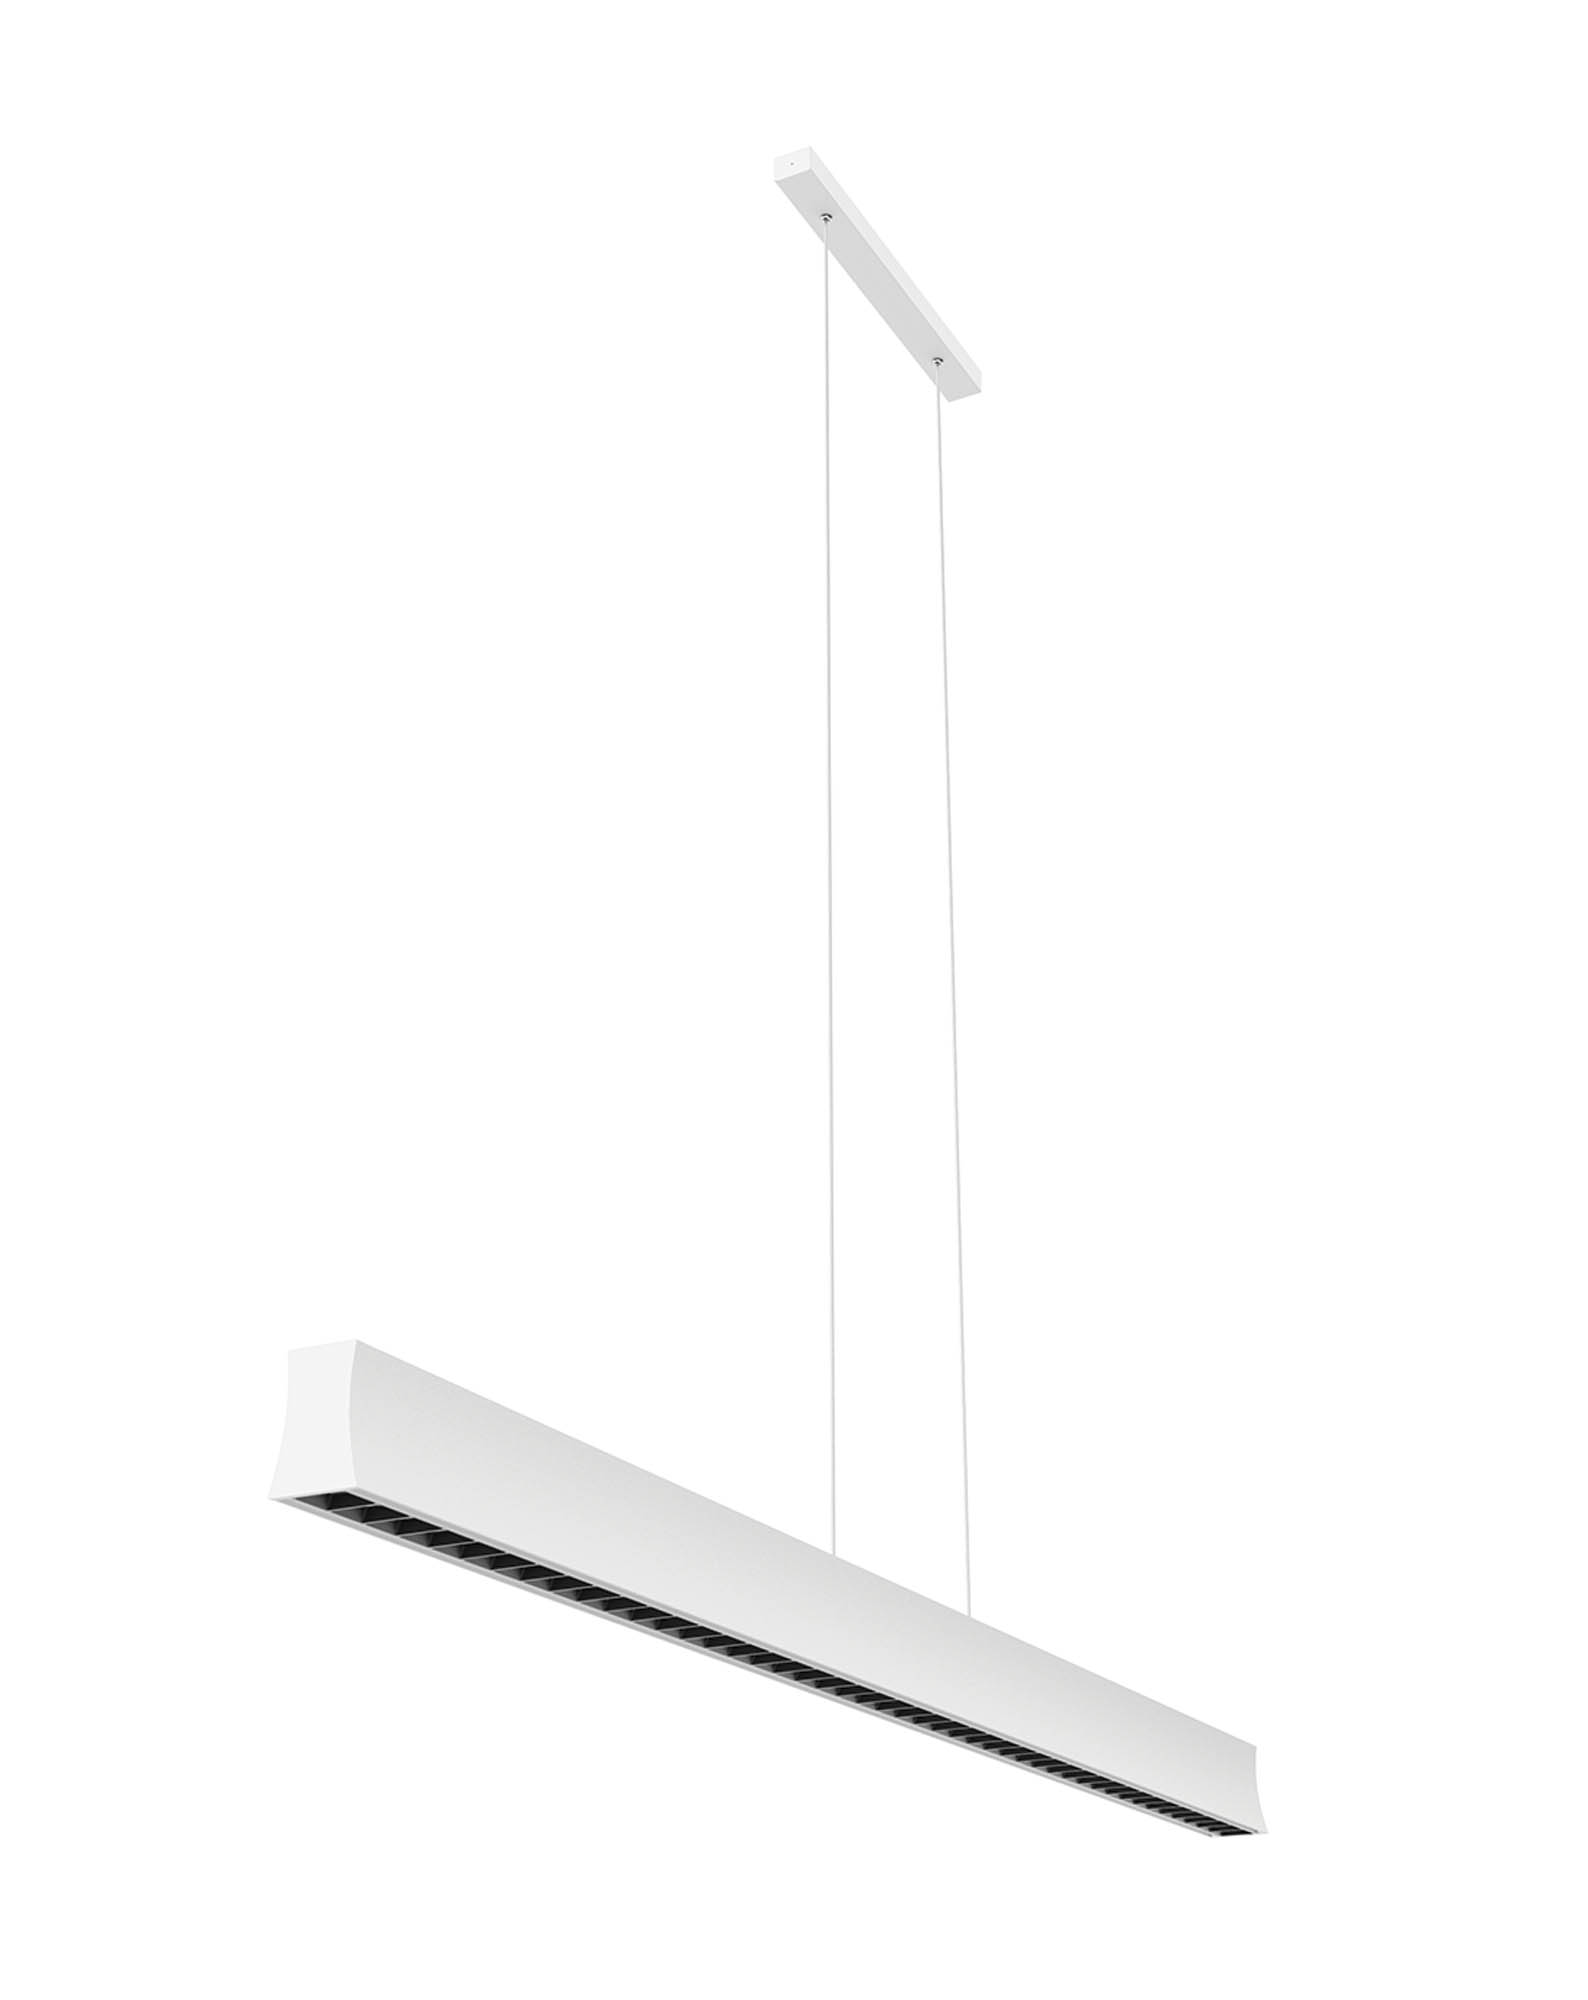 Hanok White Ceiling Lights Mantra Fusion Linear Fittings